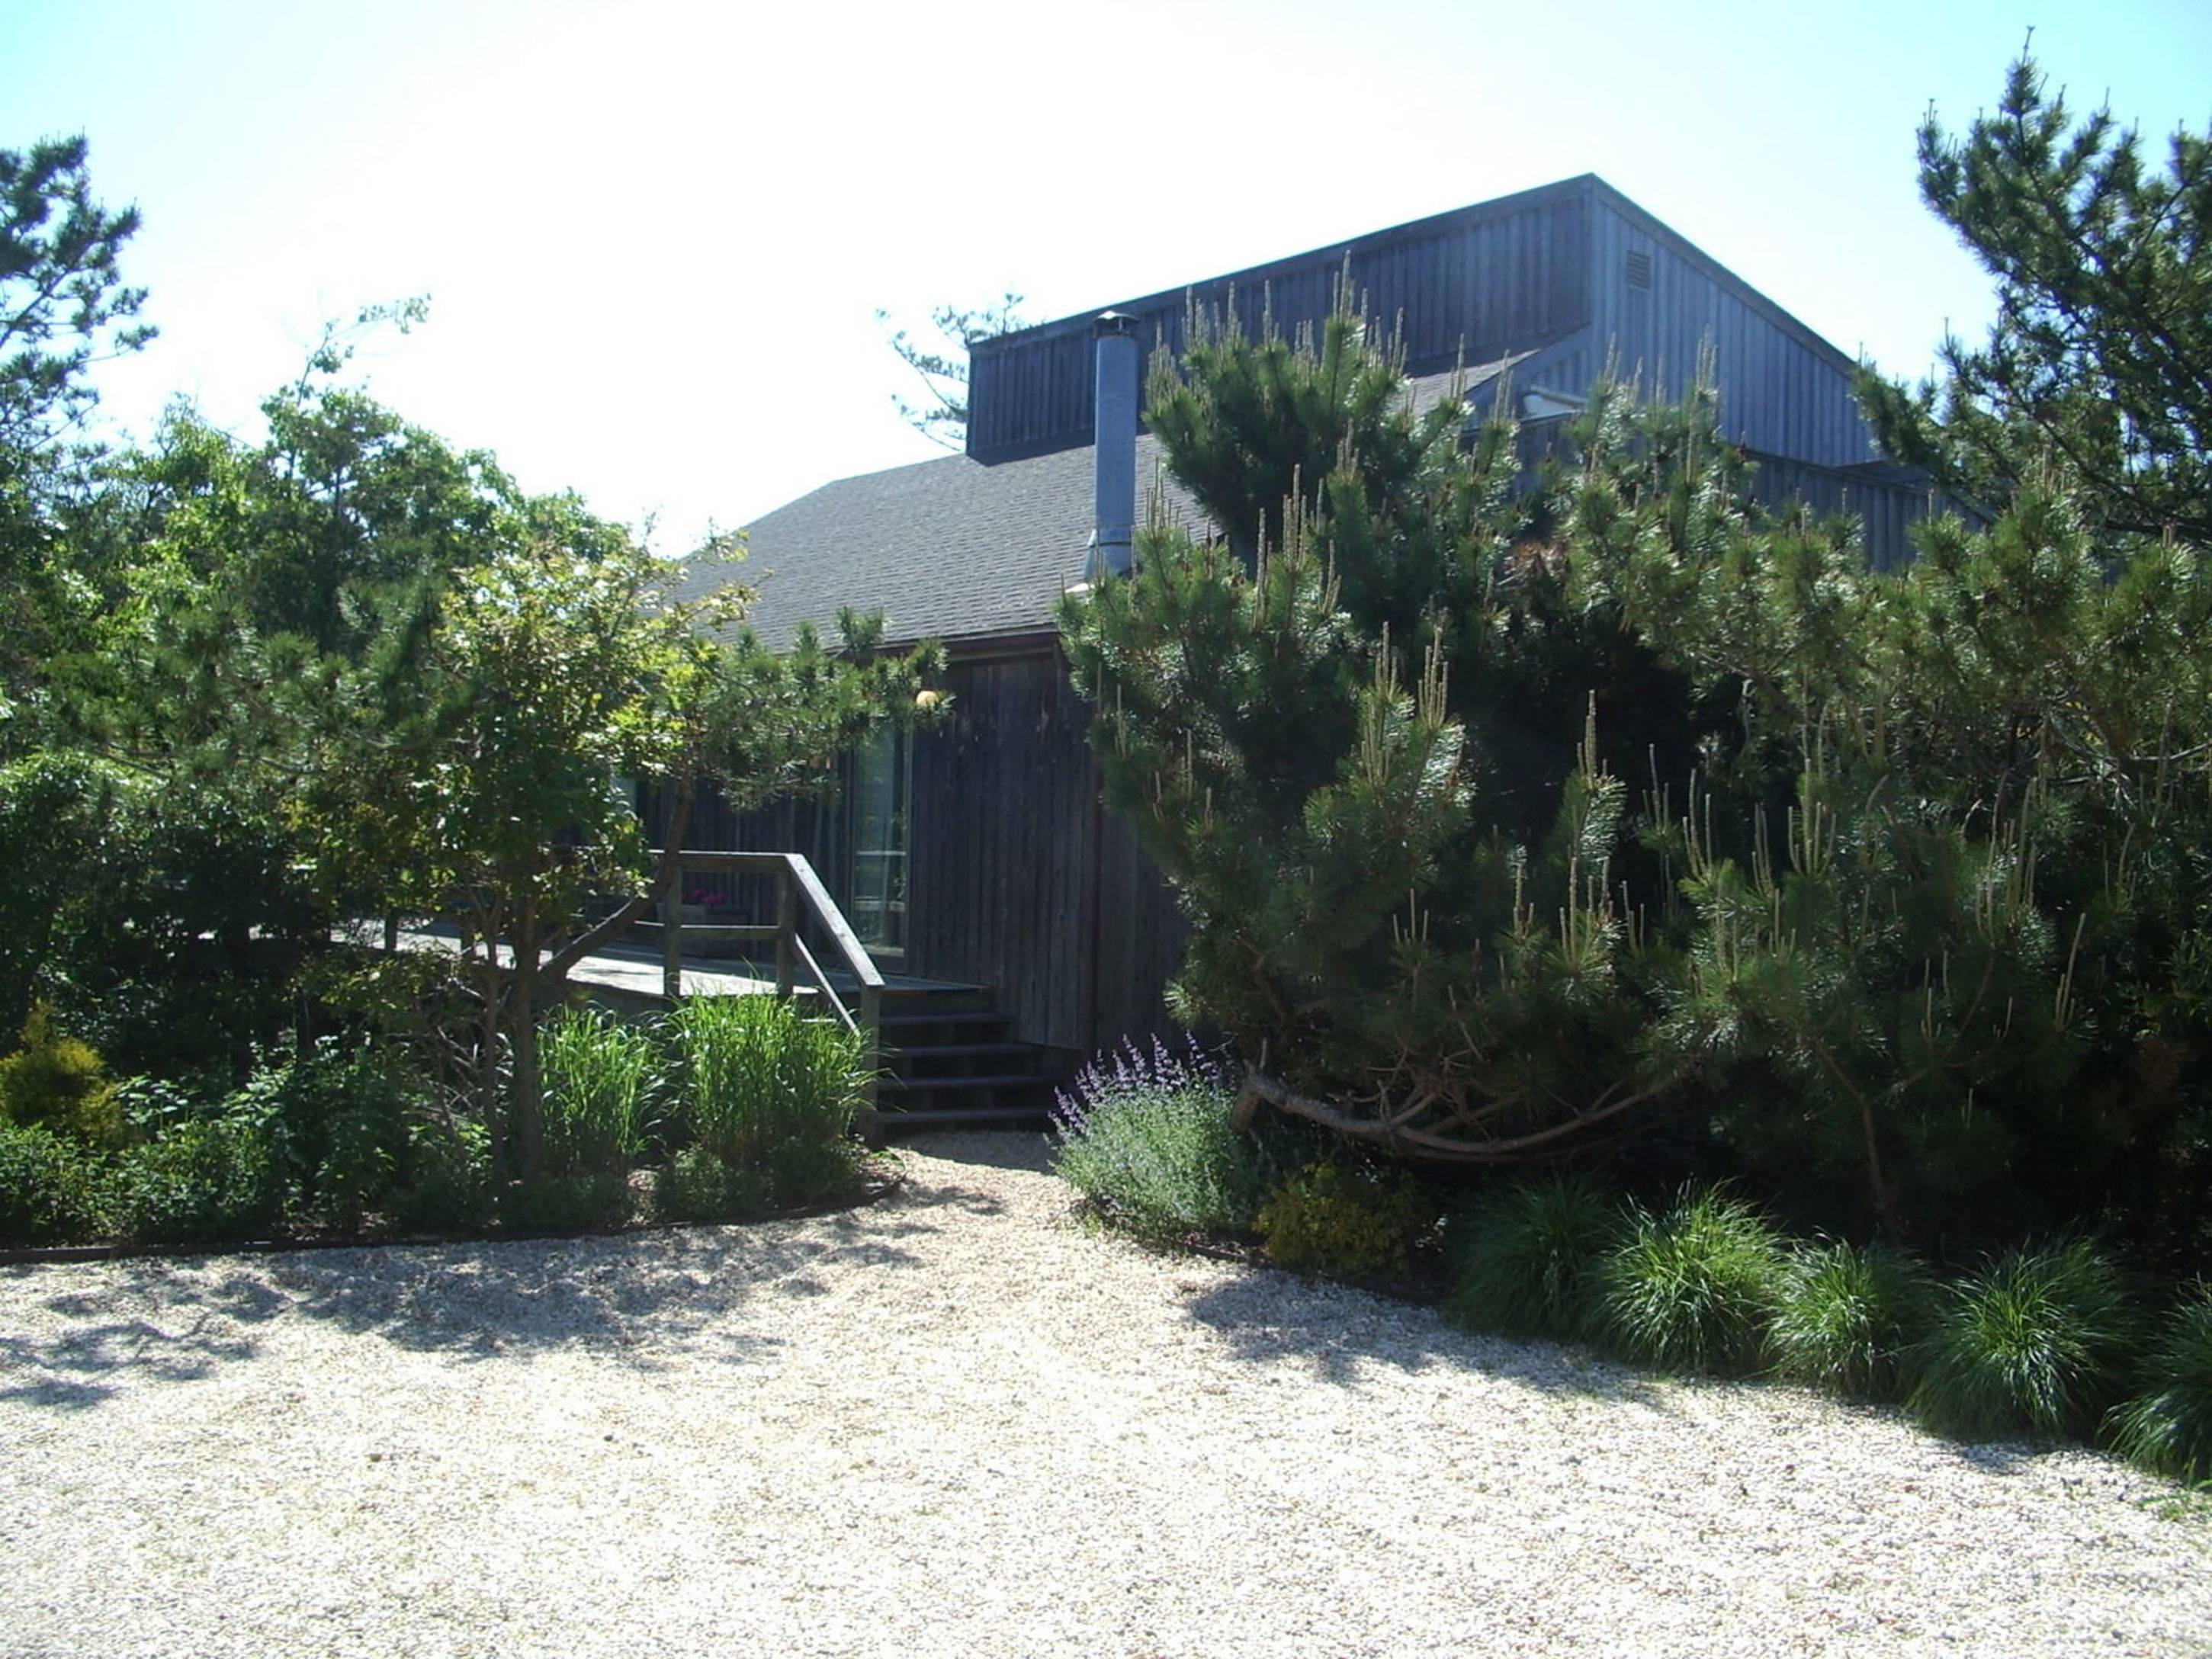 Beach House in the Dunes